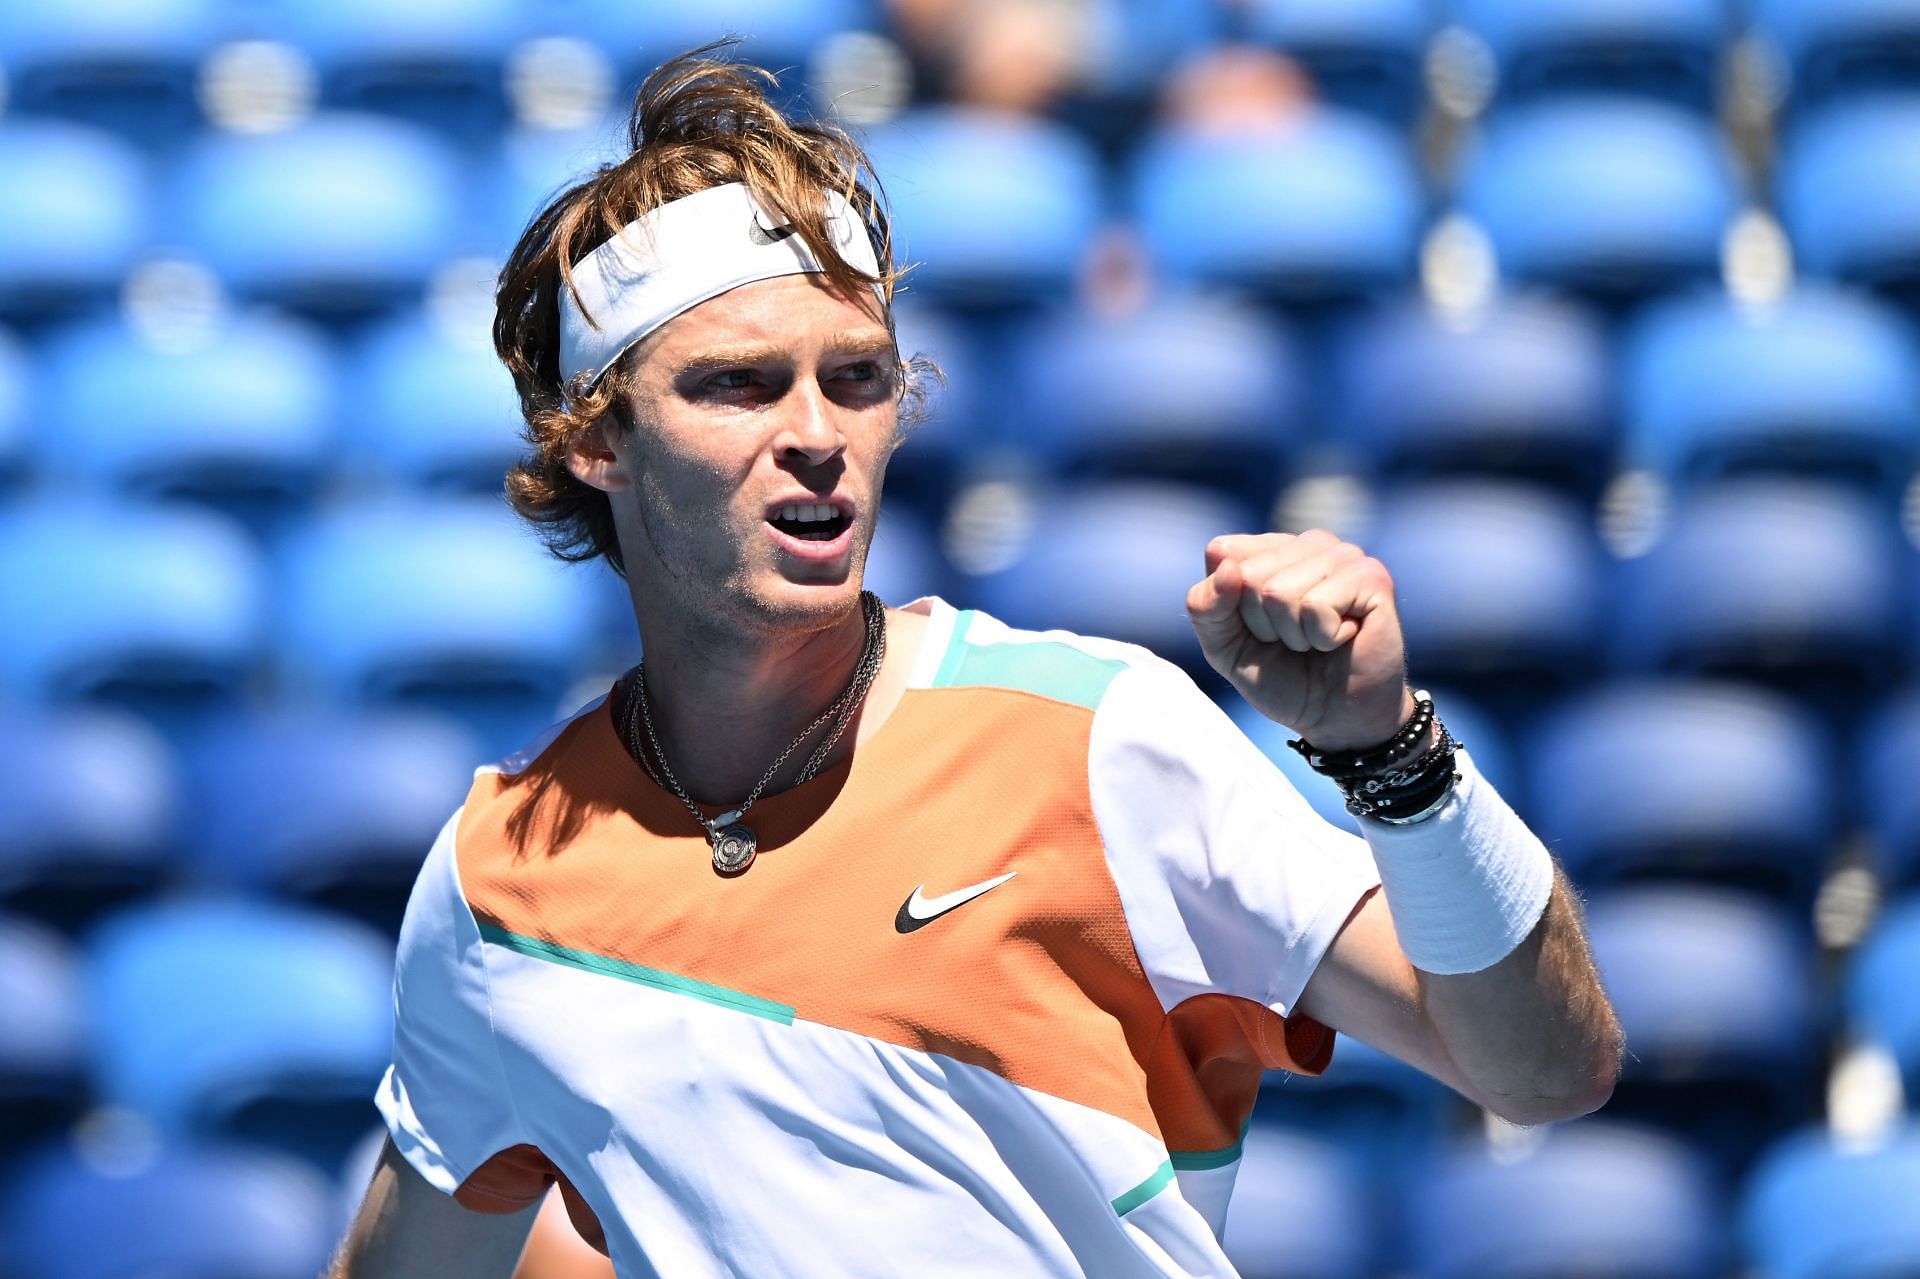 Andrey Rublev will aim to continue his run of good form at the Dubai Tennis Championships.